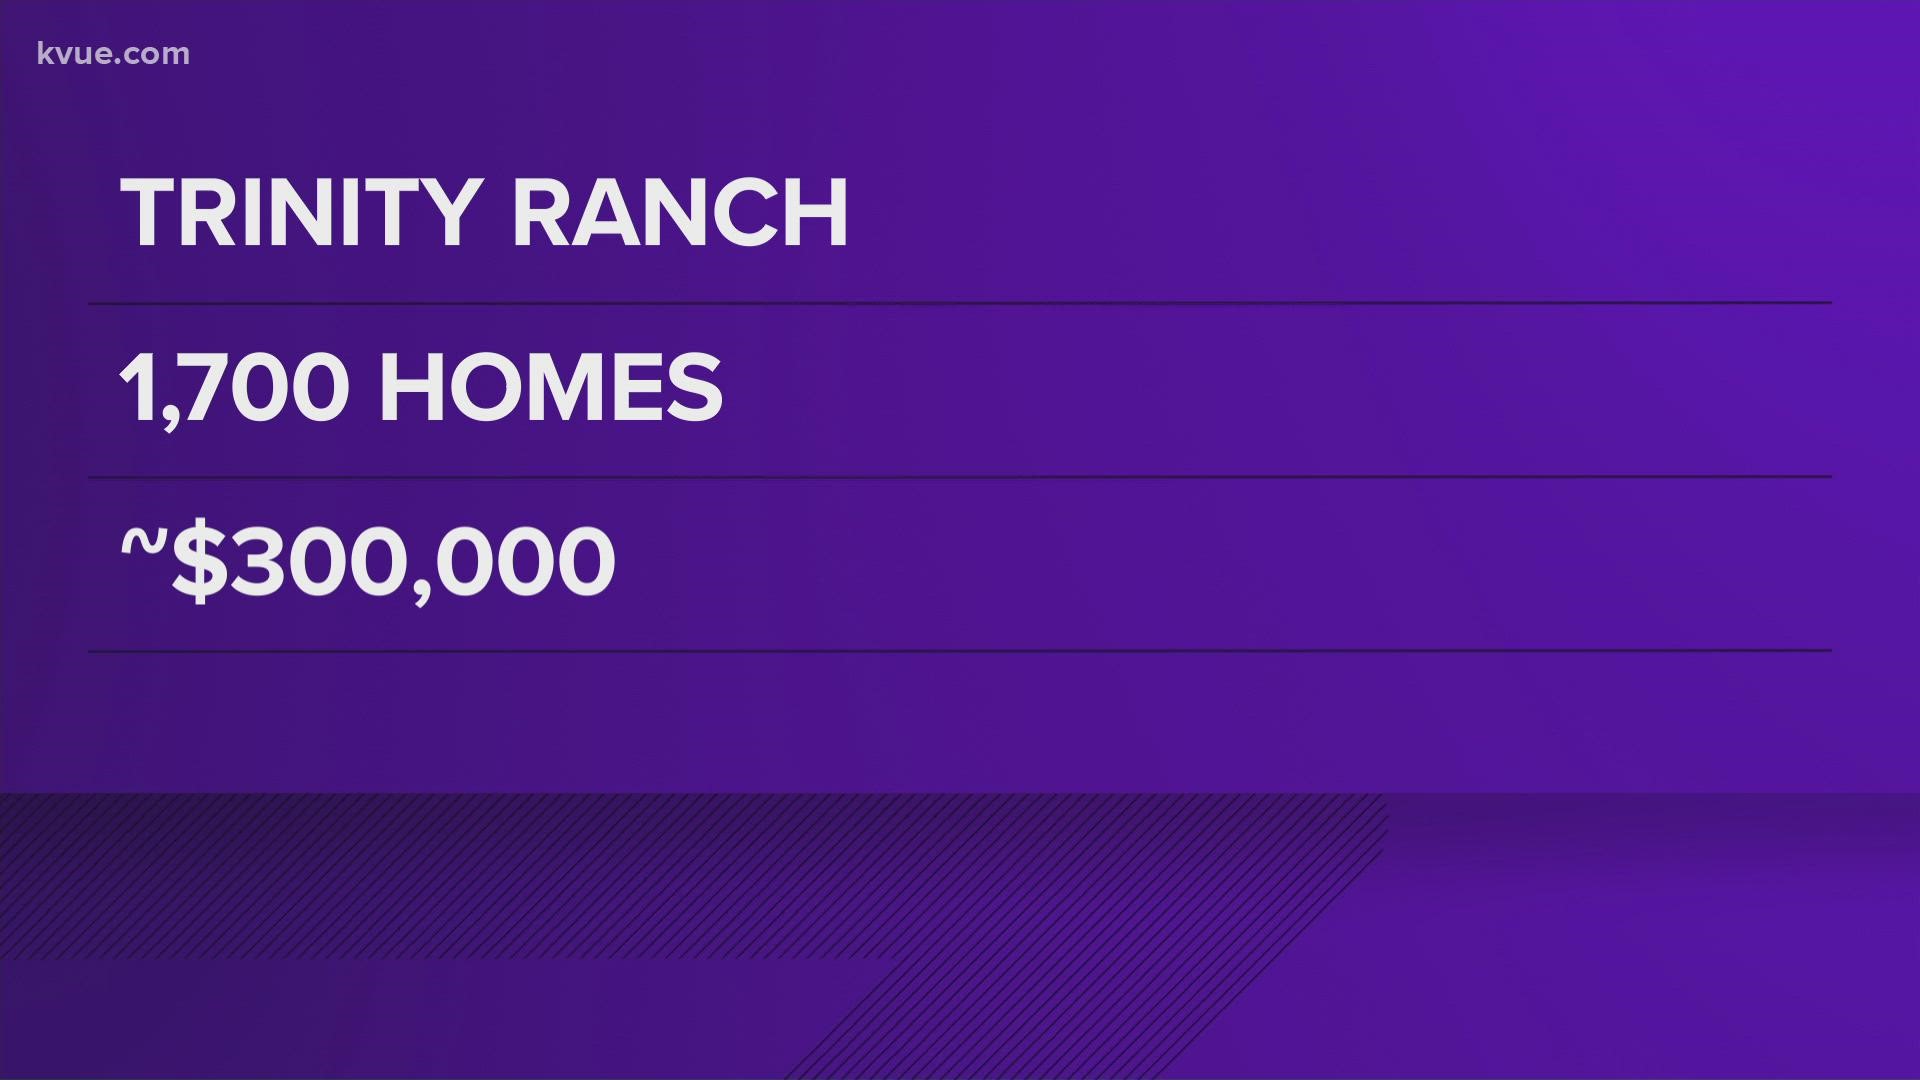 The Austin Business Journal reported that homes in Trinity Ranch will be priced in the $300,000 range.